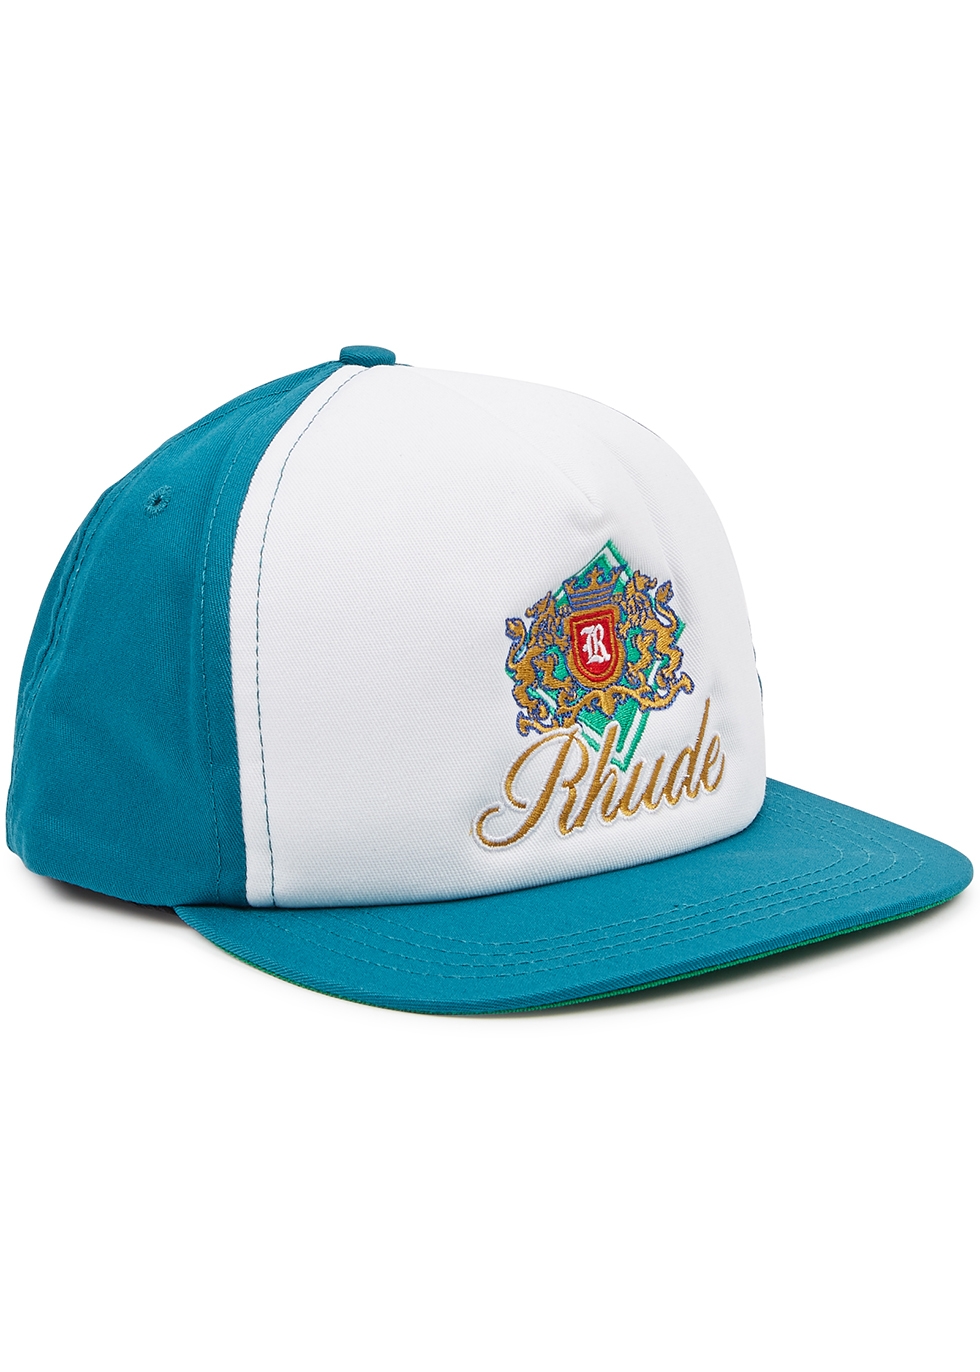 Menthol green embroidered trucker hat